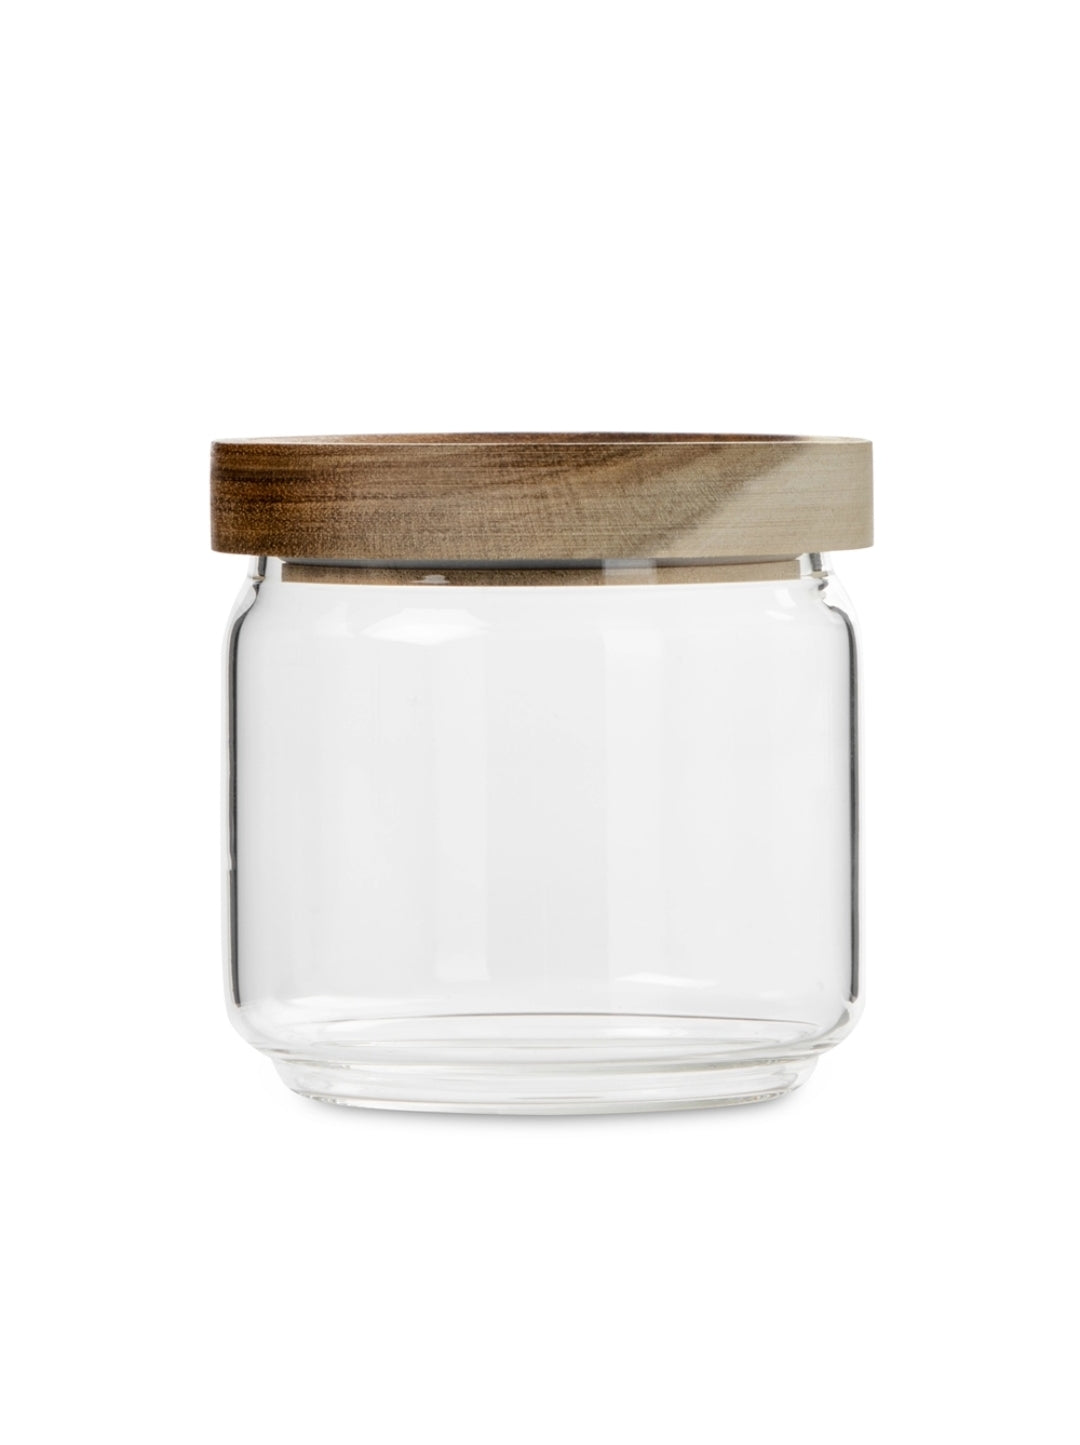 Aqua Glass Canister 400ml with Wooden Lid Acacia 27120